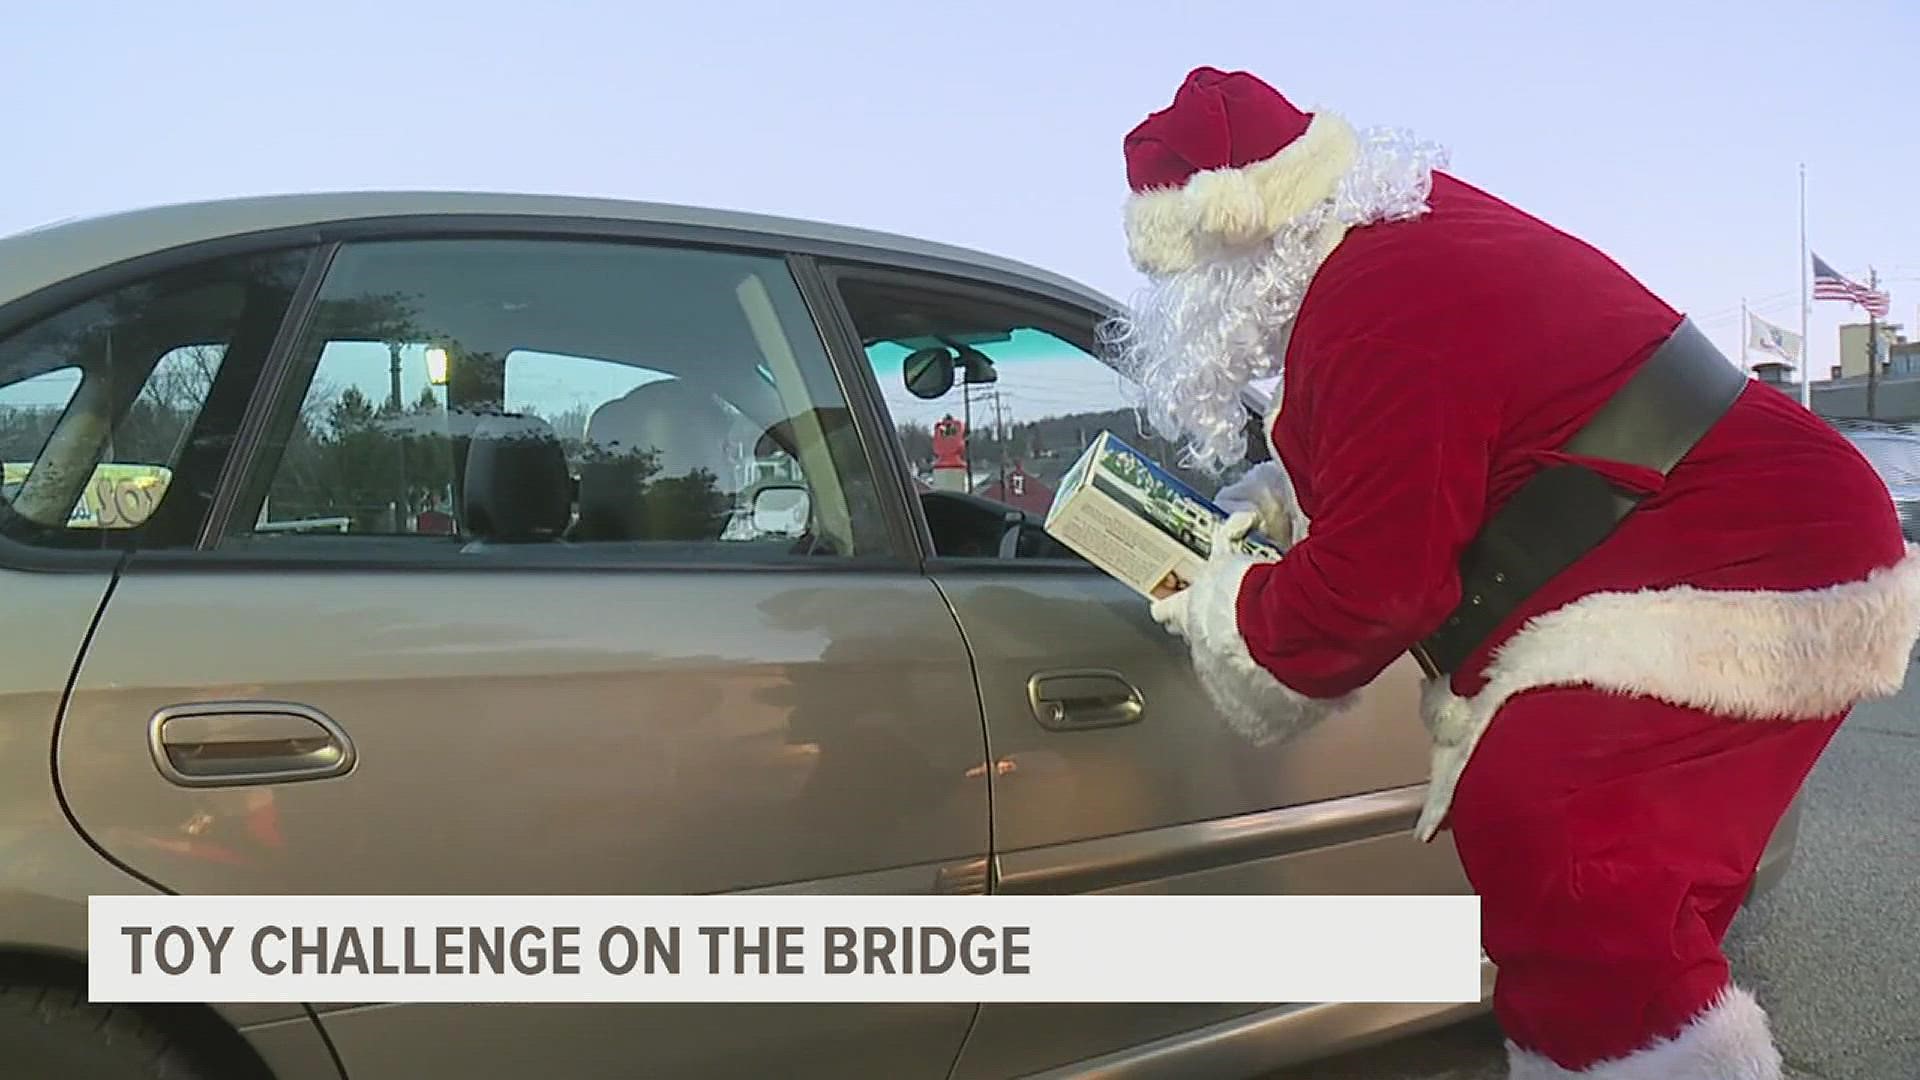 This week, "Santa D" will camp out at the Columbia-Wrightsville Bridge to collect new, unwrapped toys and stocking stuffers.